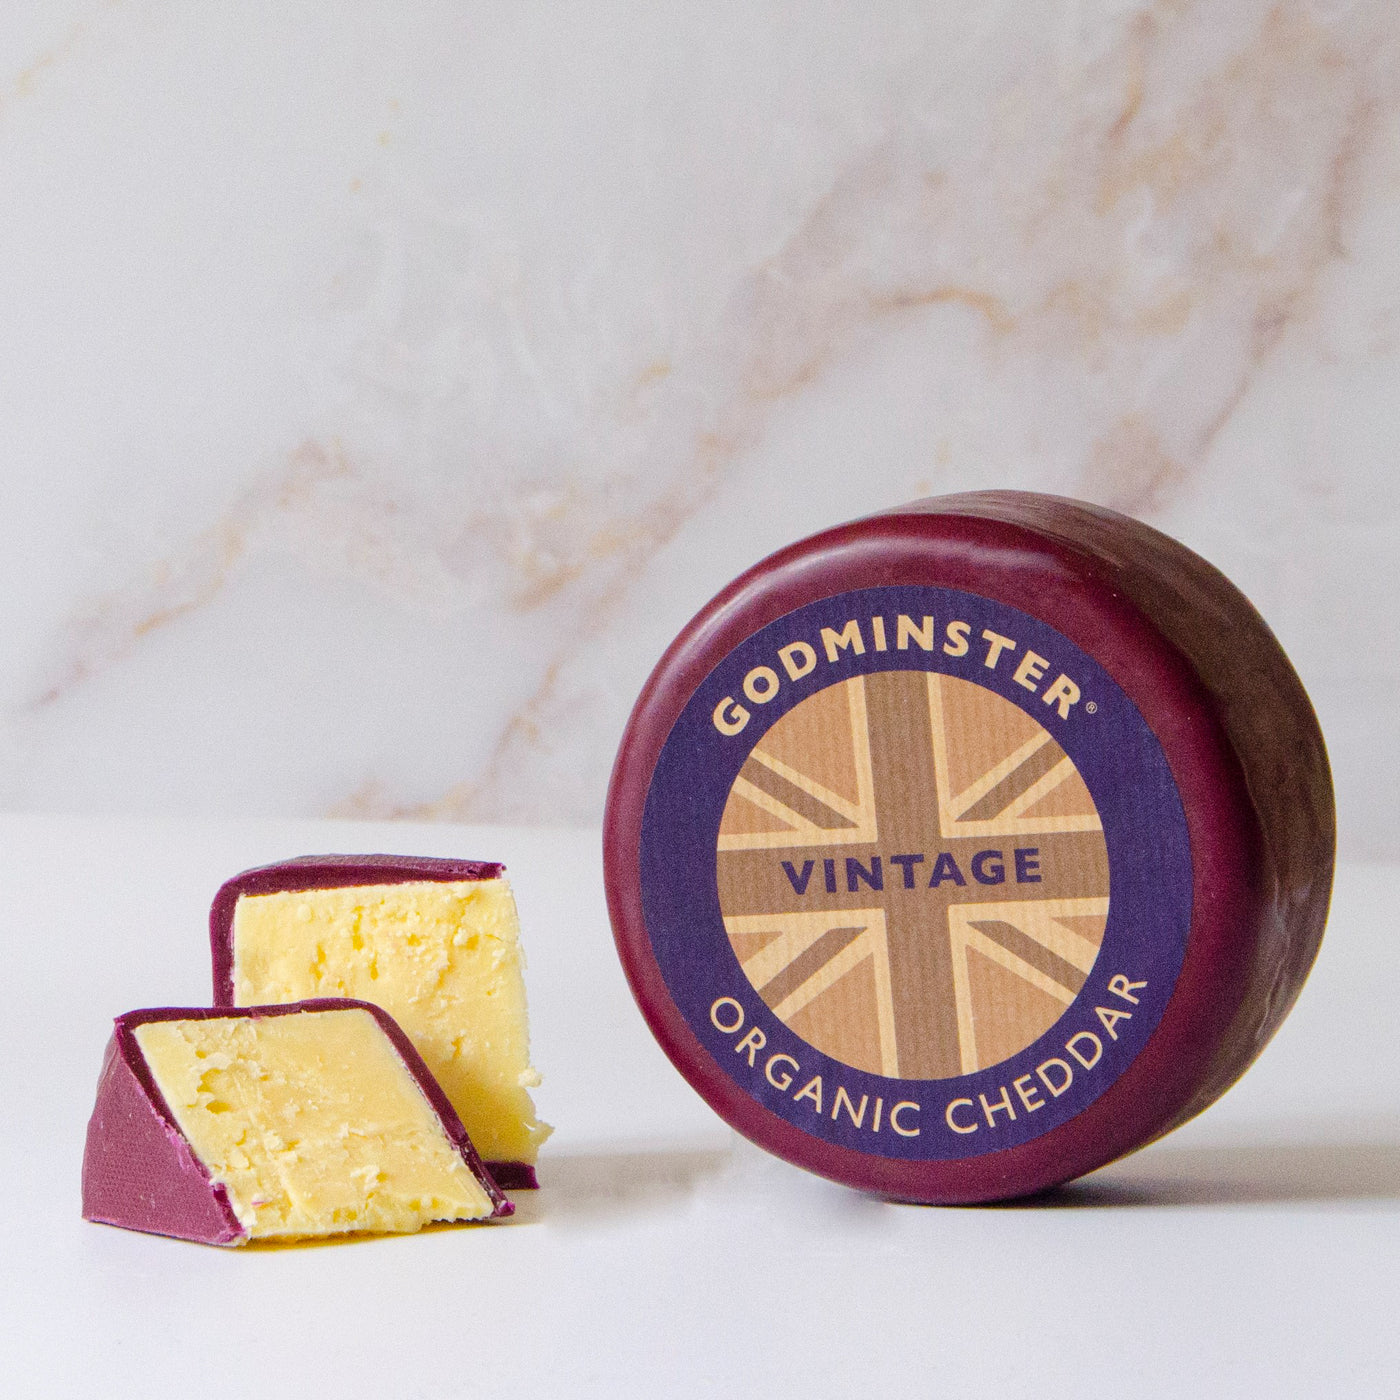 Godminster Organic - Red Waxed Truckle